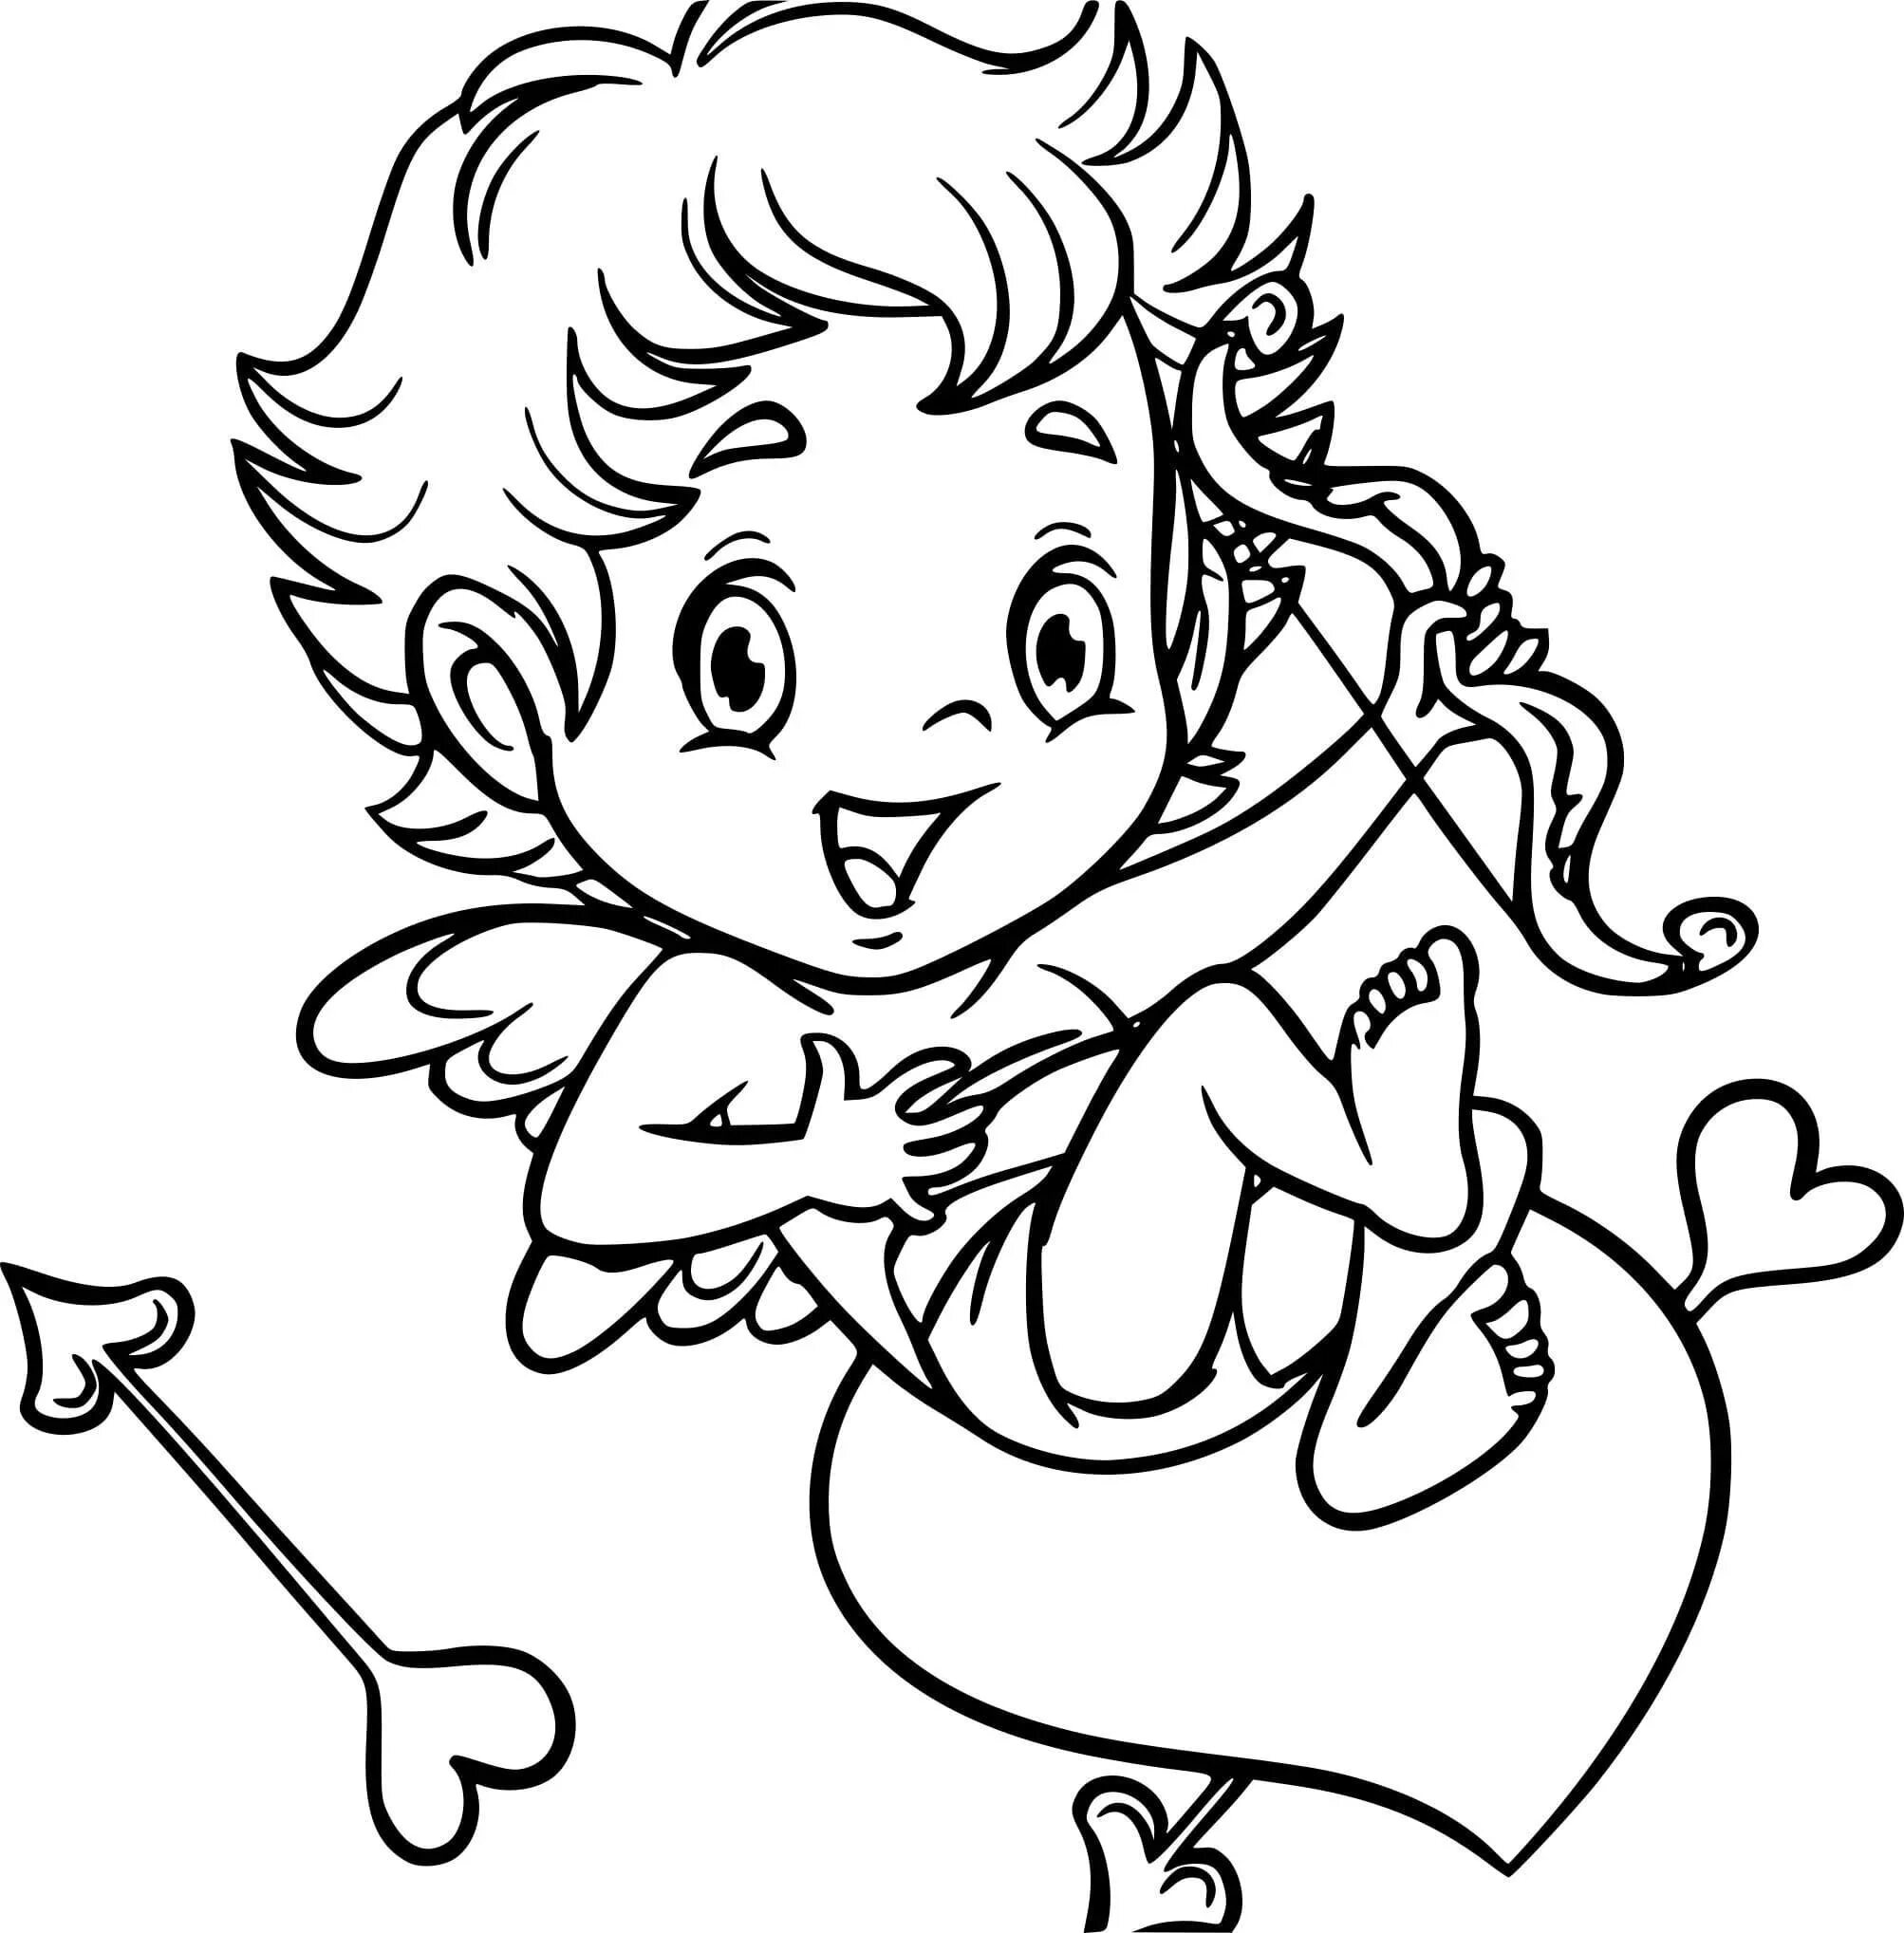 Coloring book blessed cupid with heart